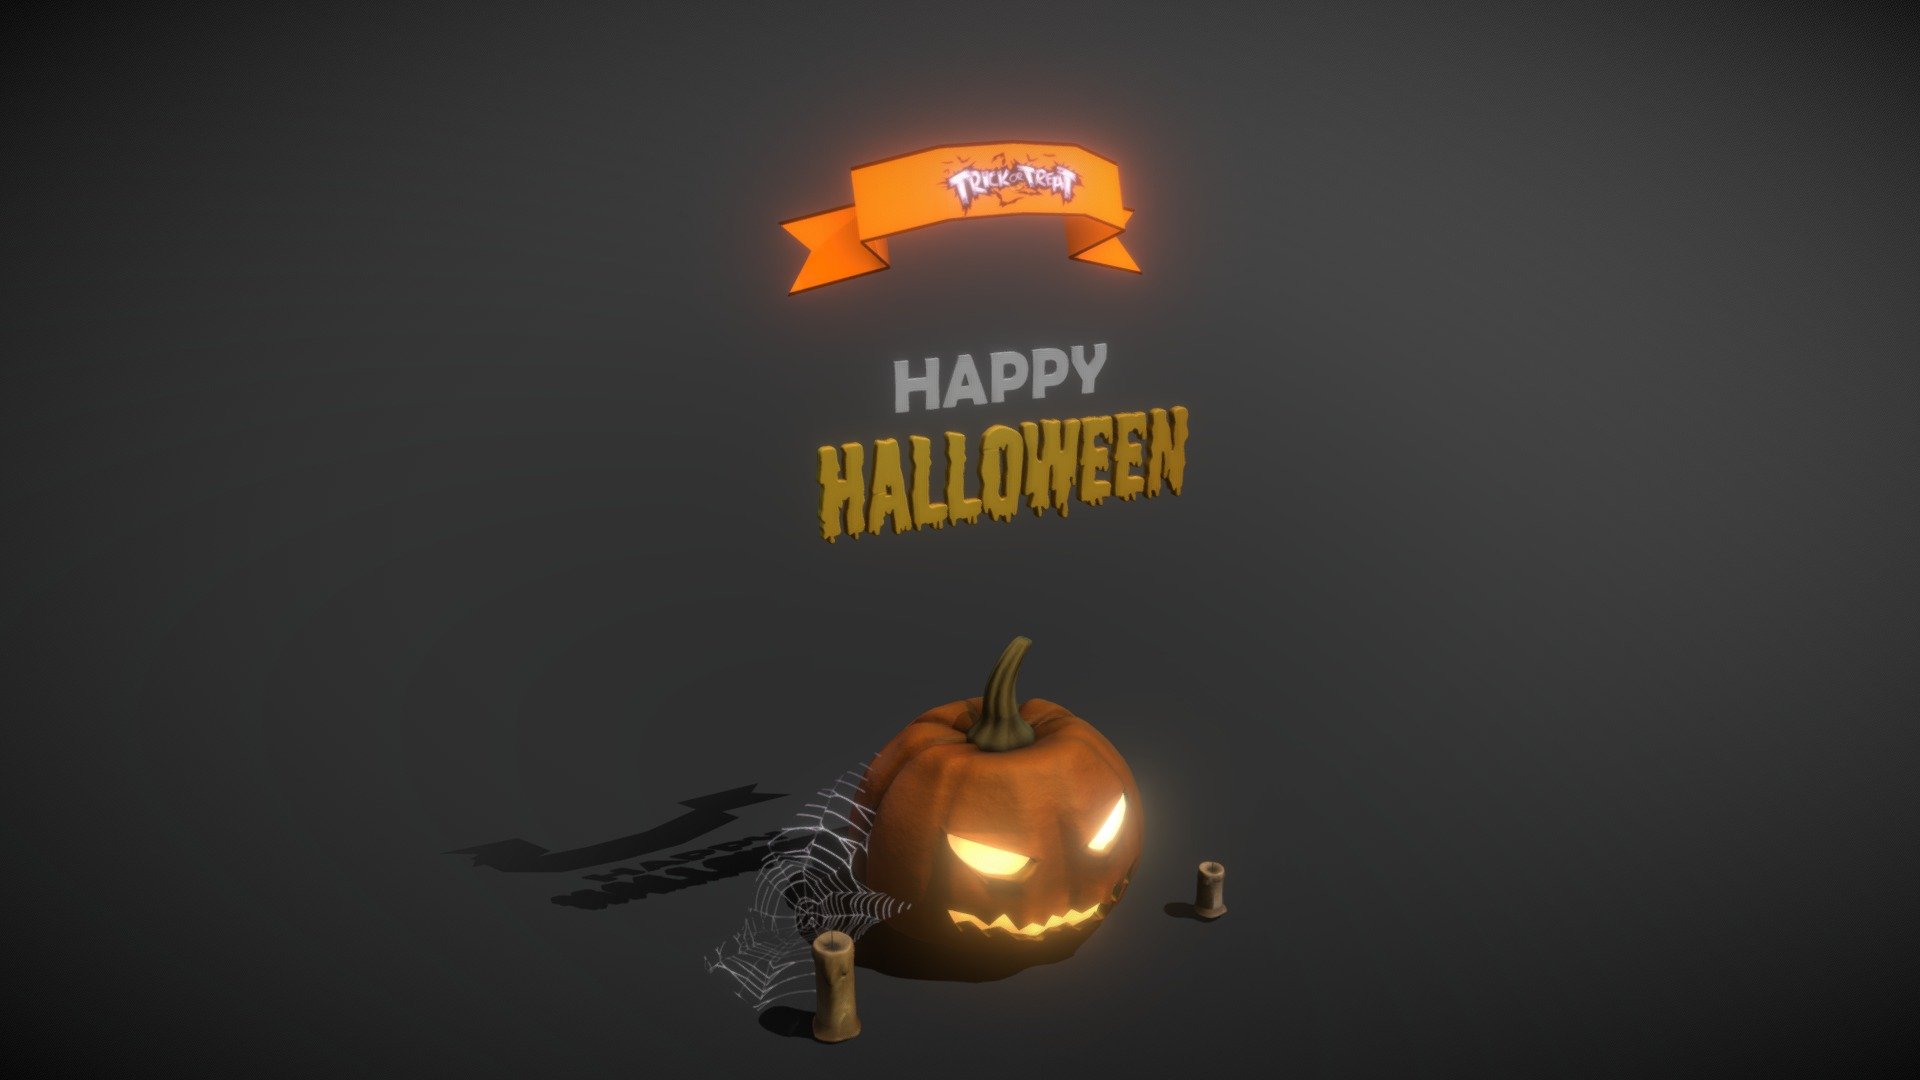 A creepy halloween scene created using low poly 3D models such as,

Pumpkin, candles, Trick or treat banner, spider web, 3D halloween text.

The asset is low poly and optimized to perform well in AR(Augmented Reality) scenes, VR(Virtual Reality) scenes and games. It is very mobile friendly and game ready asset 3d model